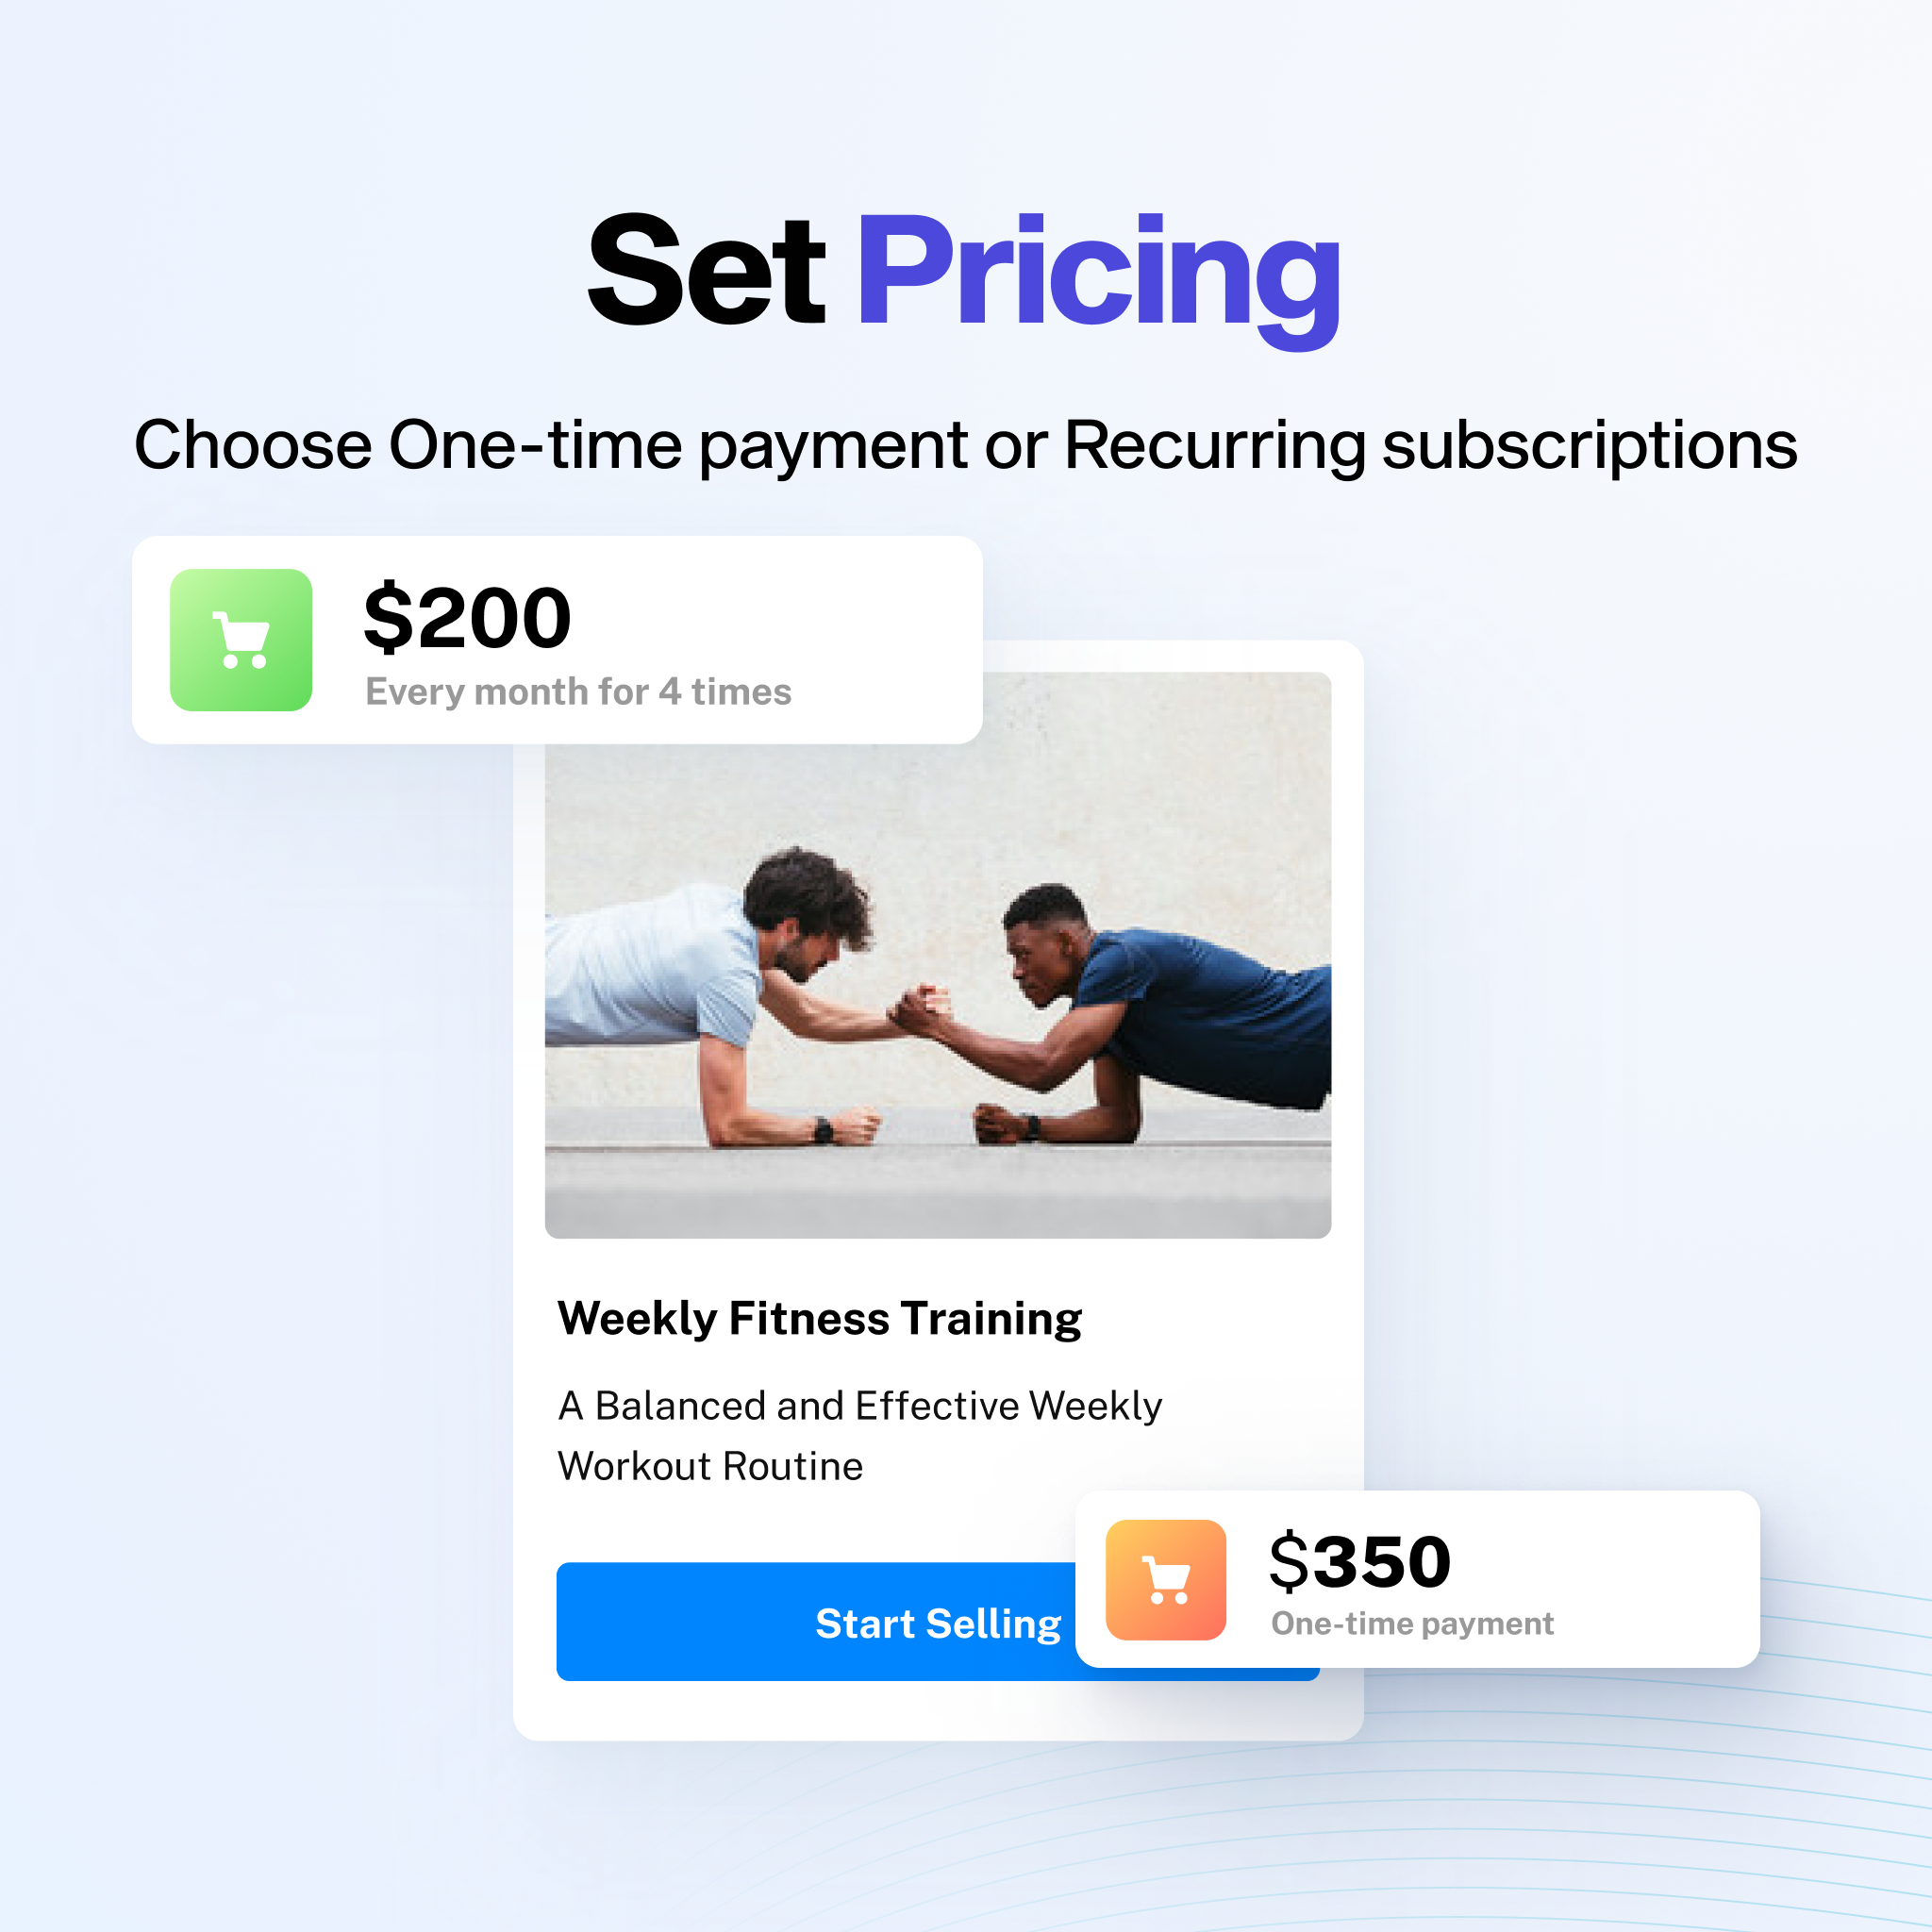 set pricing with one-time payment or recurring subscriptions